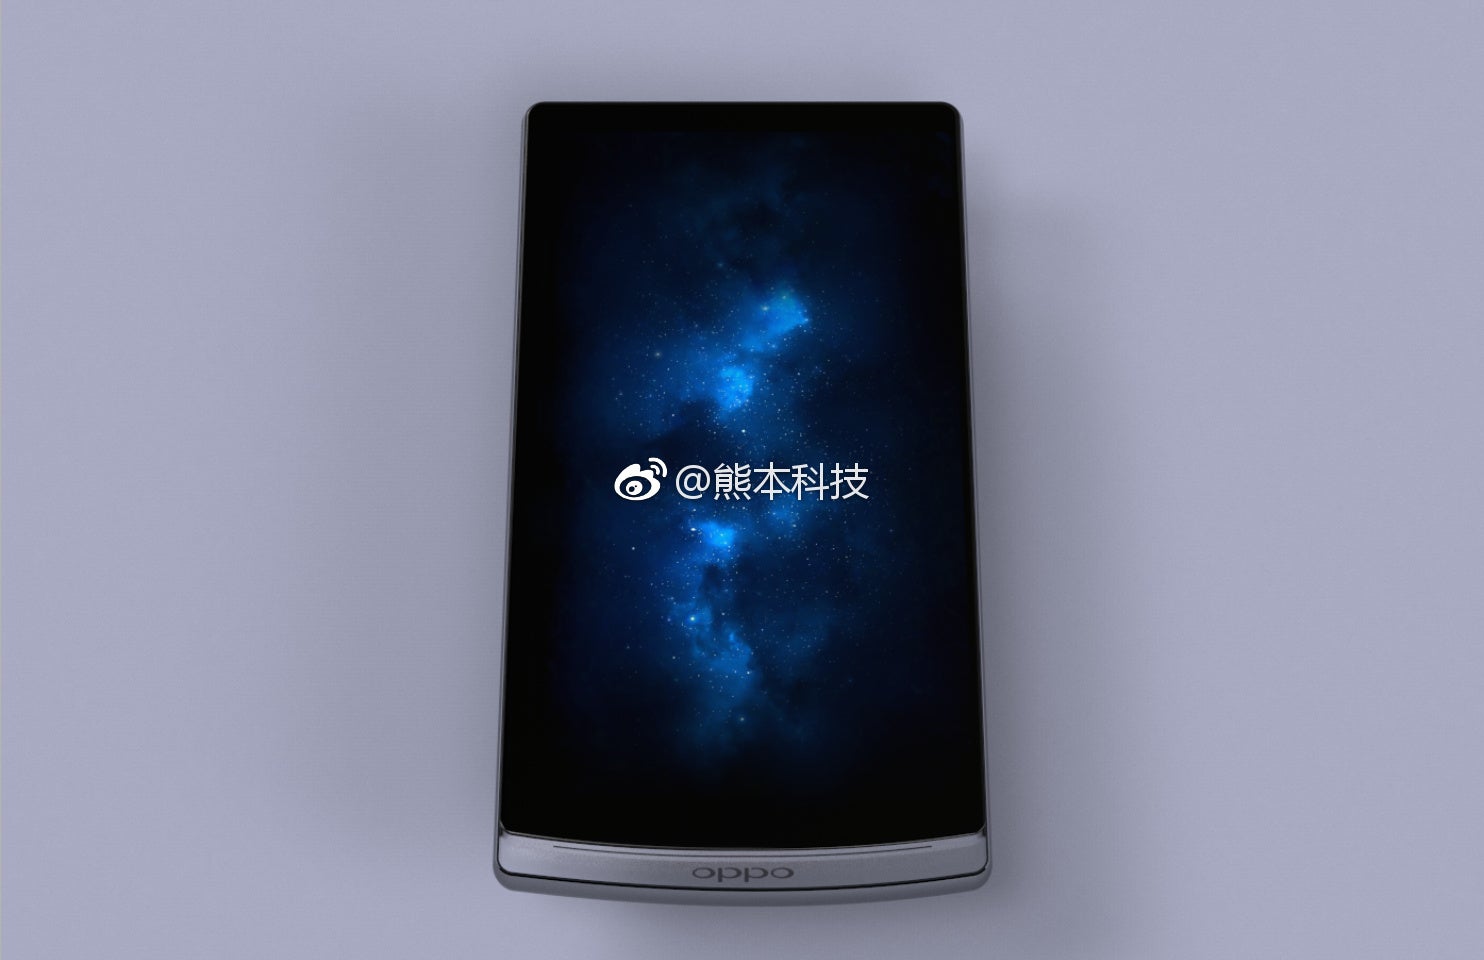 New Oppo Find 9 image gives another wishful glimpse at the phone that never was